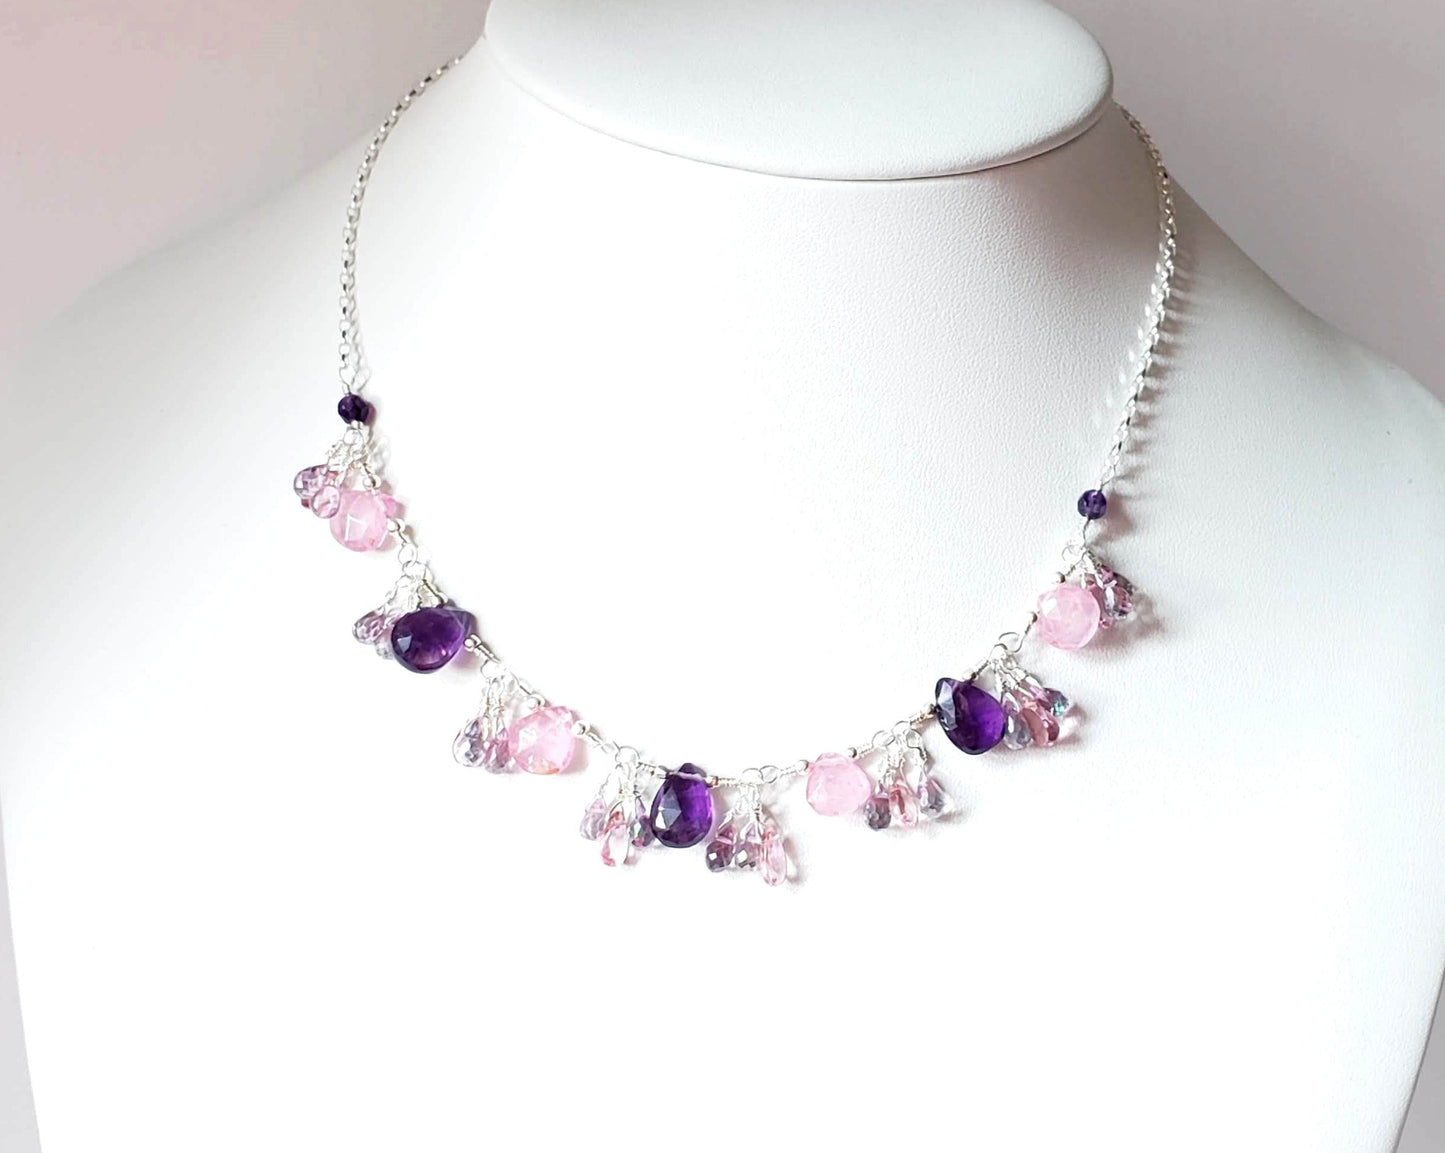 Summer Garden Petunia Gem Necklace-Handcrafted, One of a Kind, Sterling Silver Necklace made with Amethyst, Strawberry Quartz, Pink Topaz, Mystic Topaz